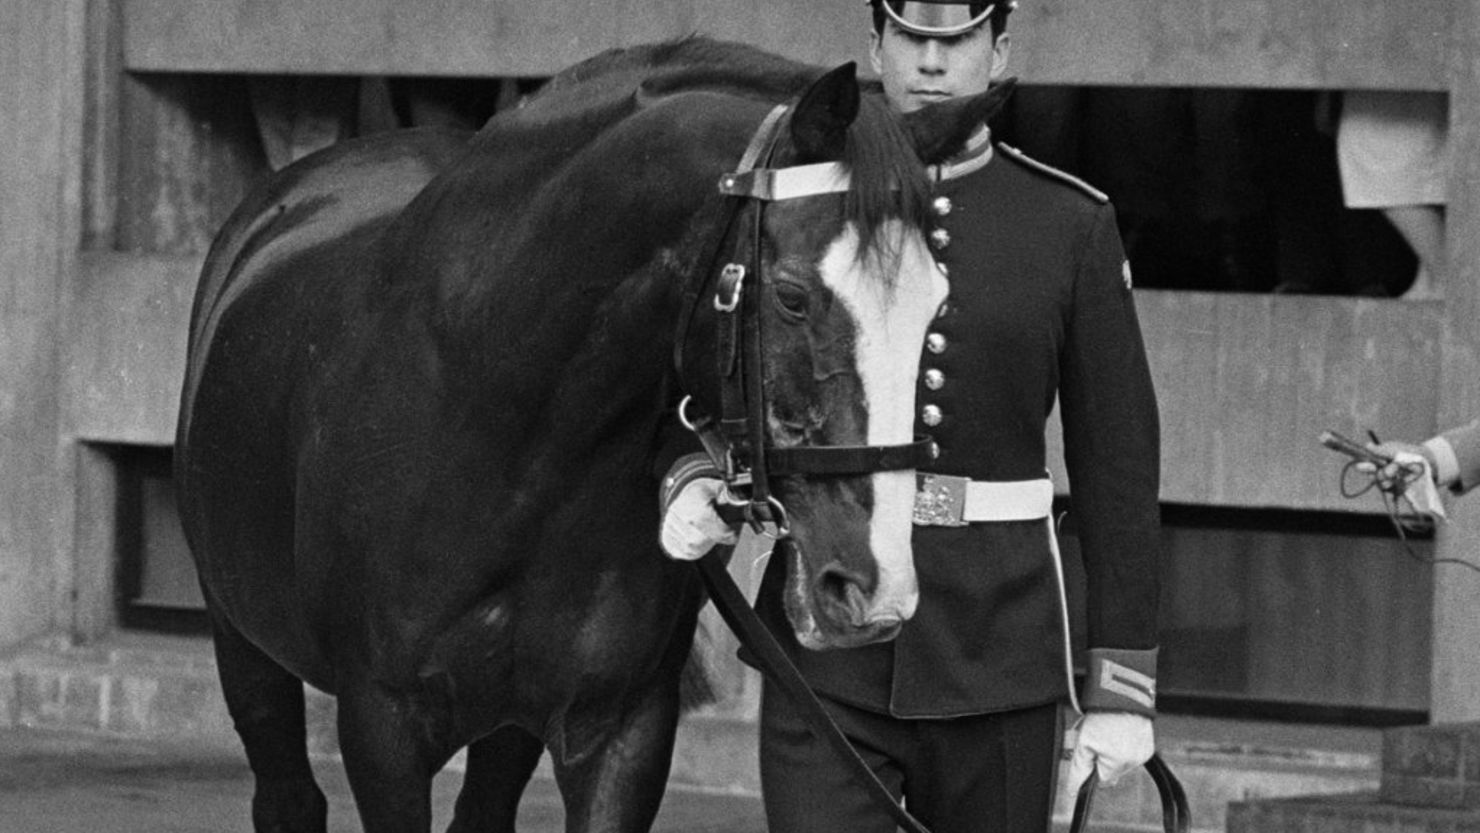 Sefton was one of the horses injured in Hyde Park on July 20, 1982, when an IRA car bomb killed five soldiers.